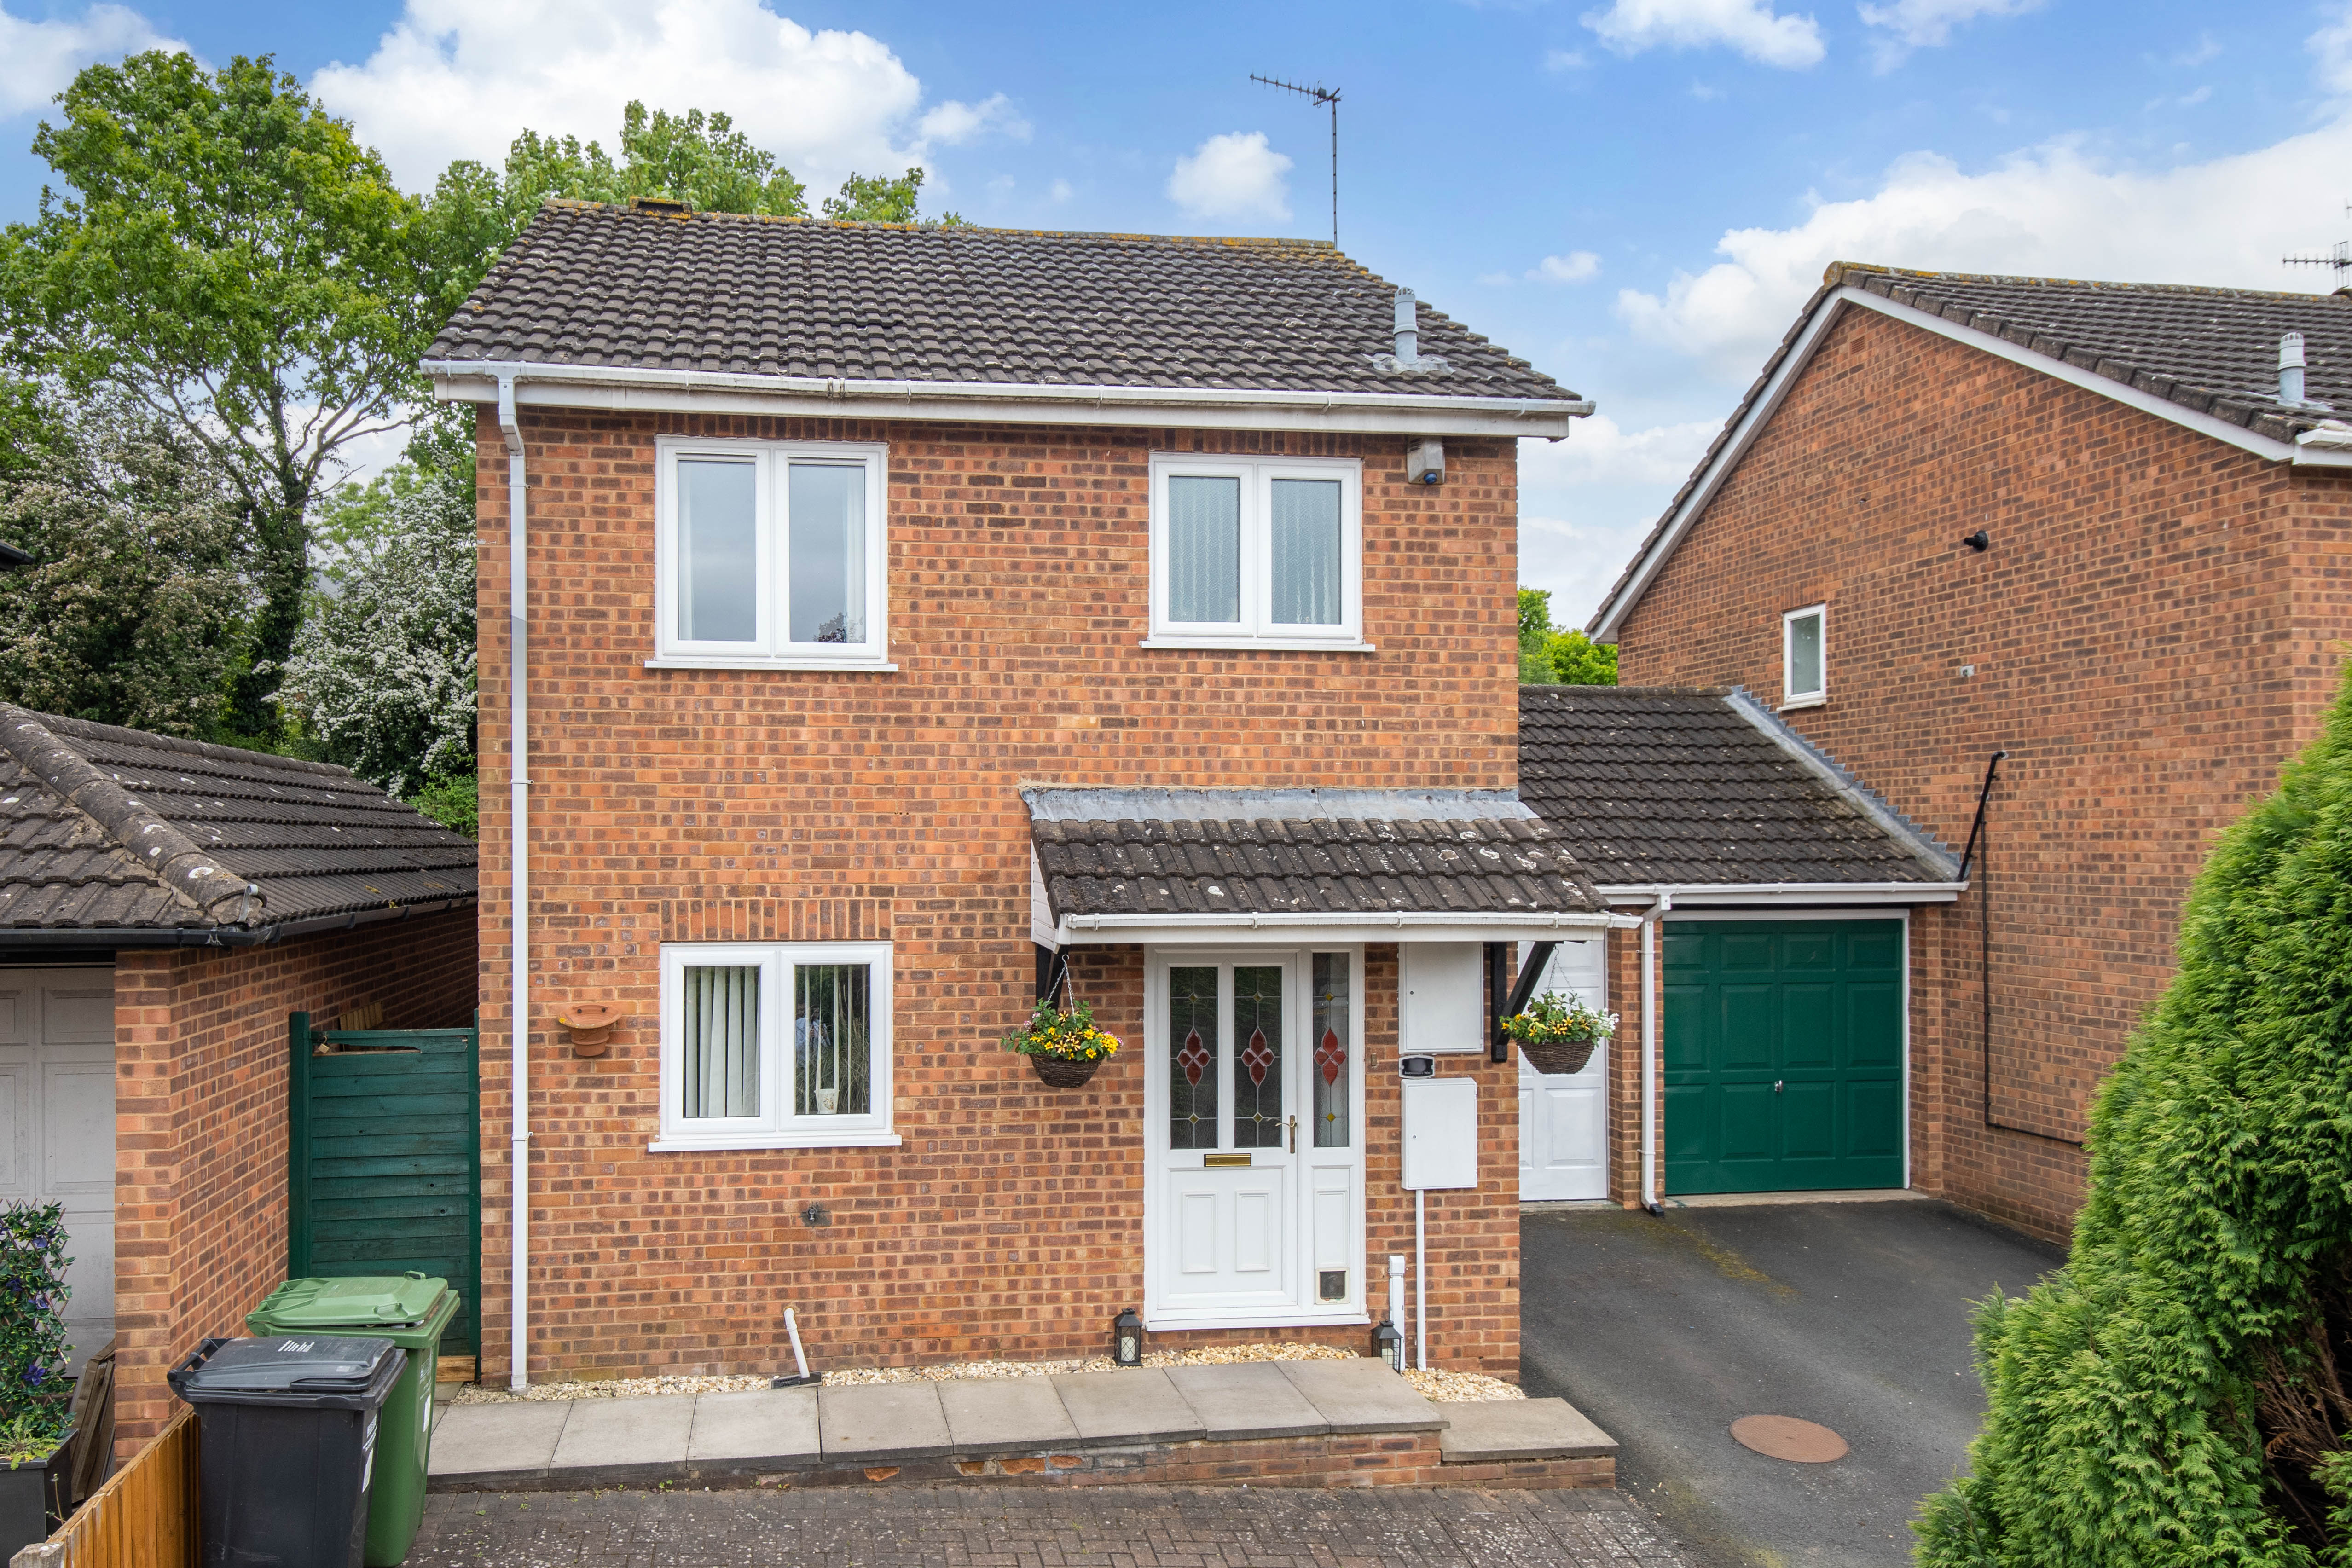 3 bed house for sale in Barns Croft Way, Droitwich  - Property Image 2